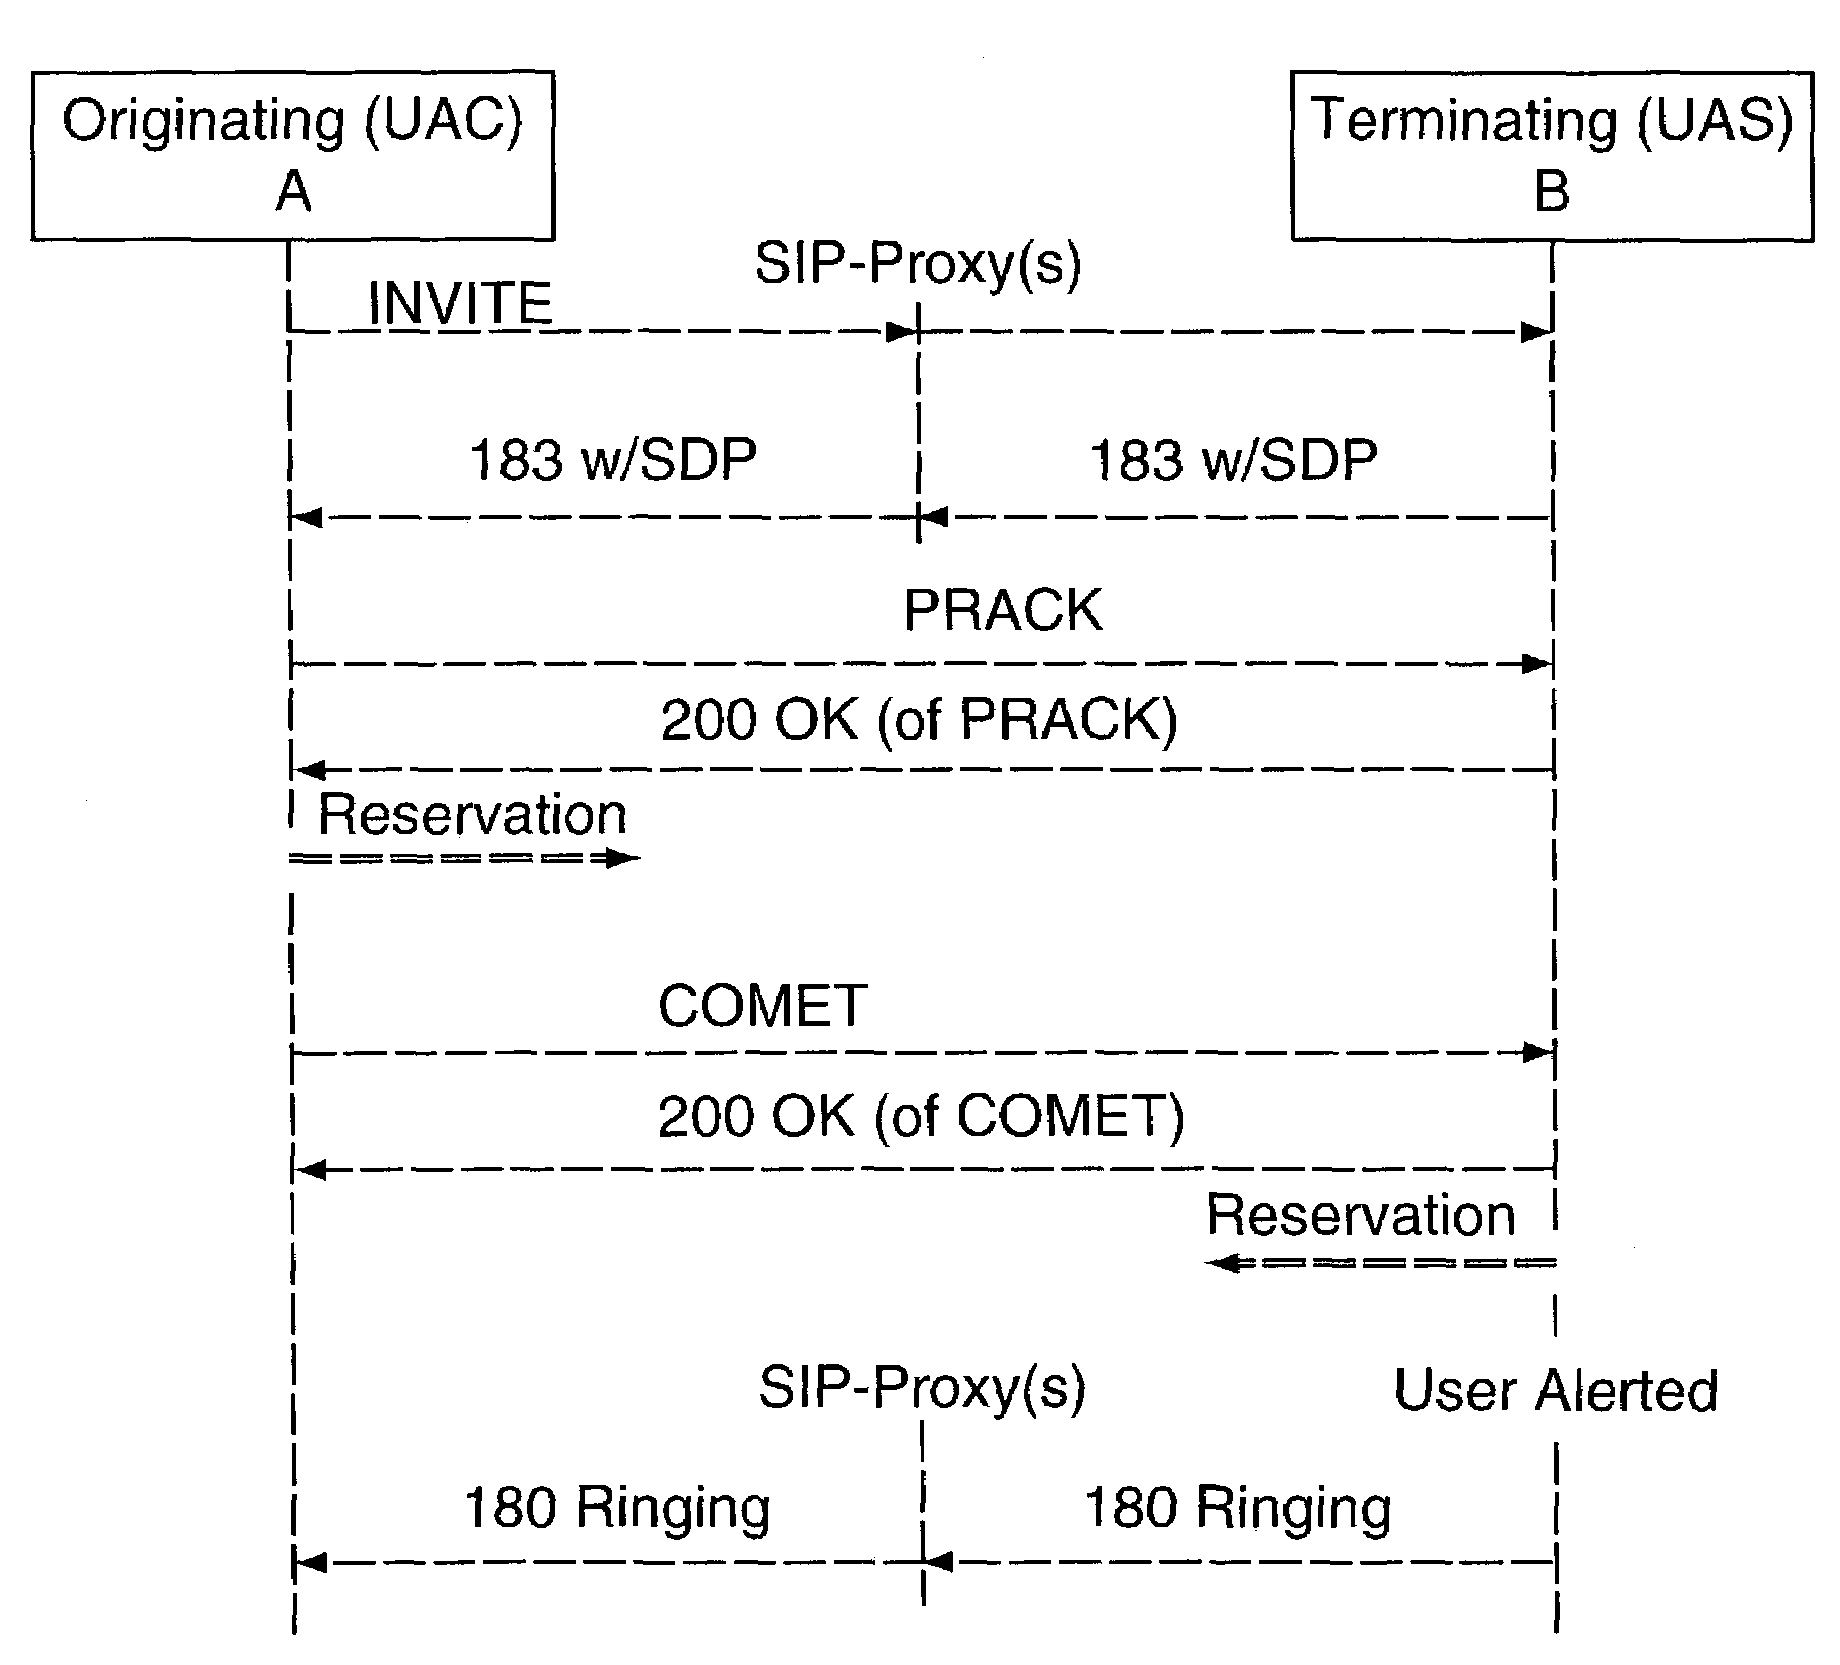 Methods for enhancing SDP preconditions signalling for IP multimedia sessions